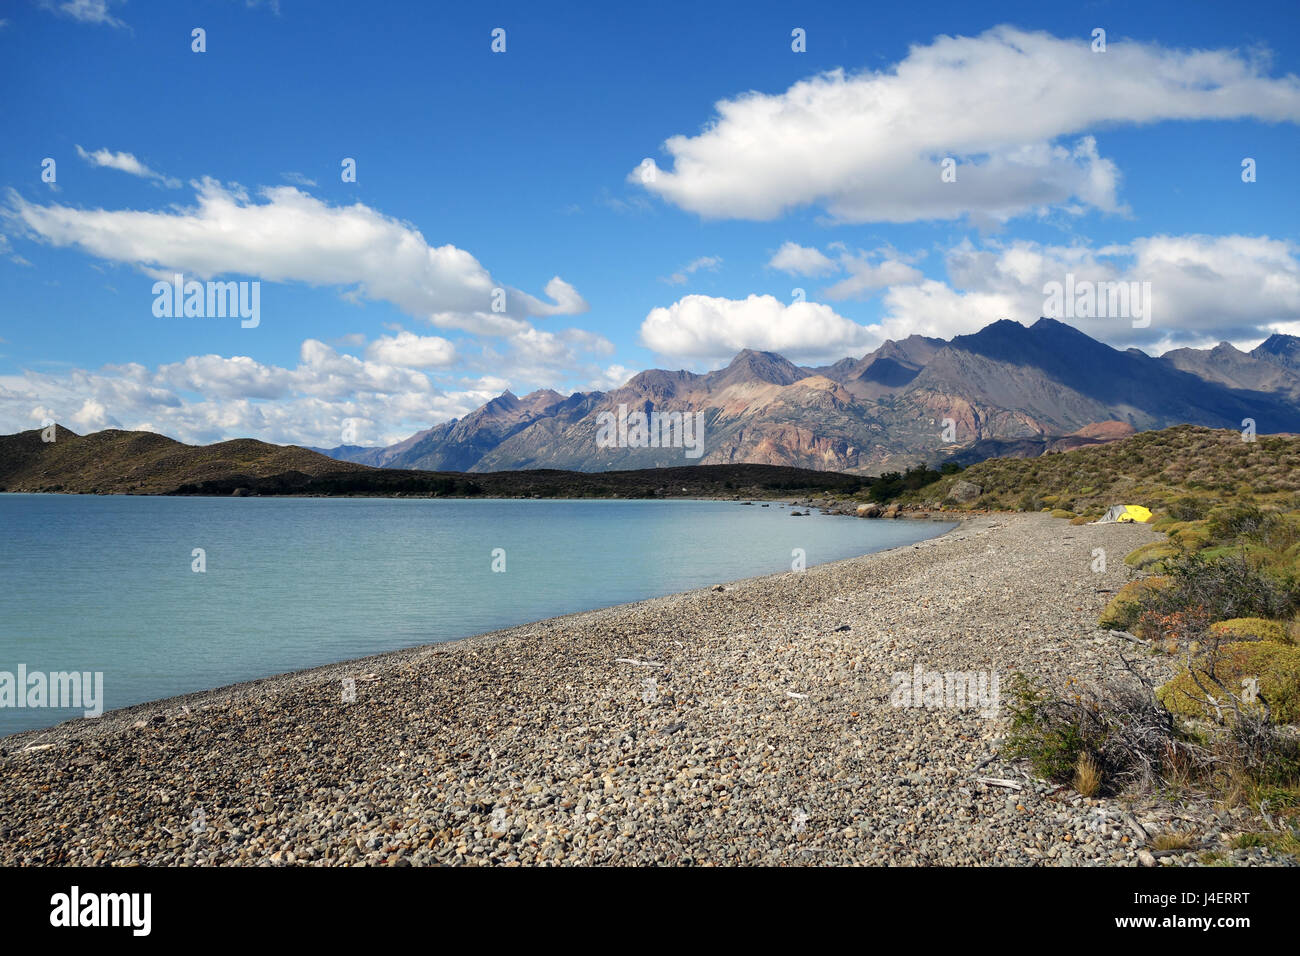 Camping on the shores of Lago Viedma, Argentine Patagonia, Argentina, South America Stock Photo